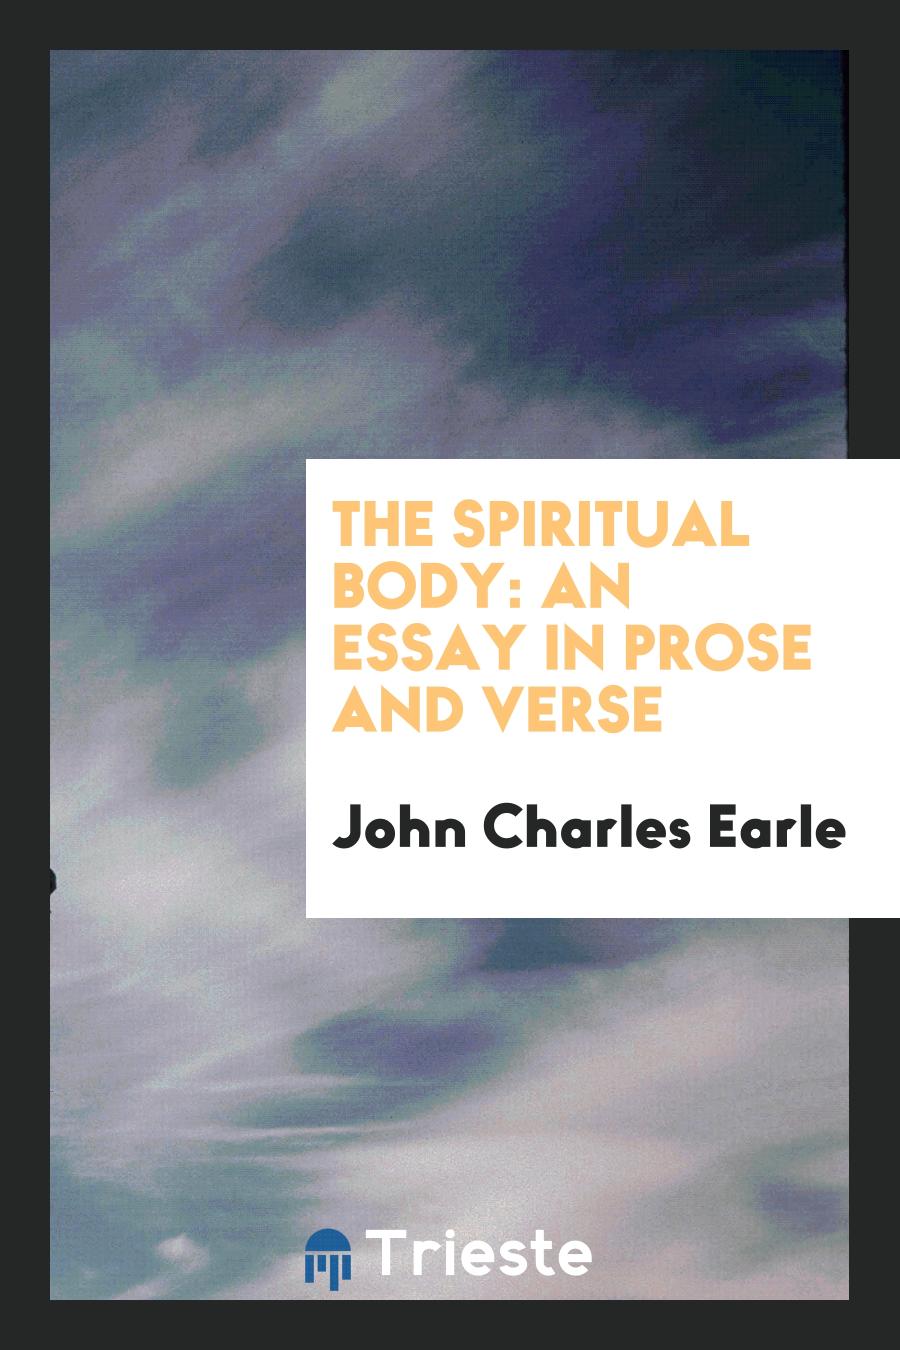 The Spiritual Body: An Essay in Prose and Verse